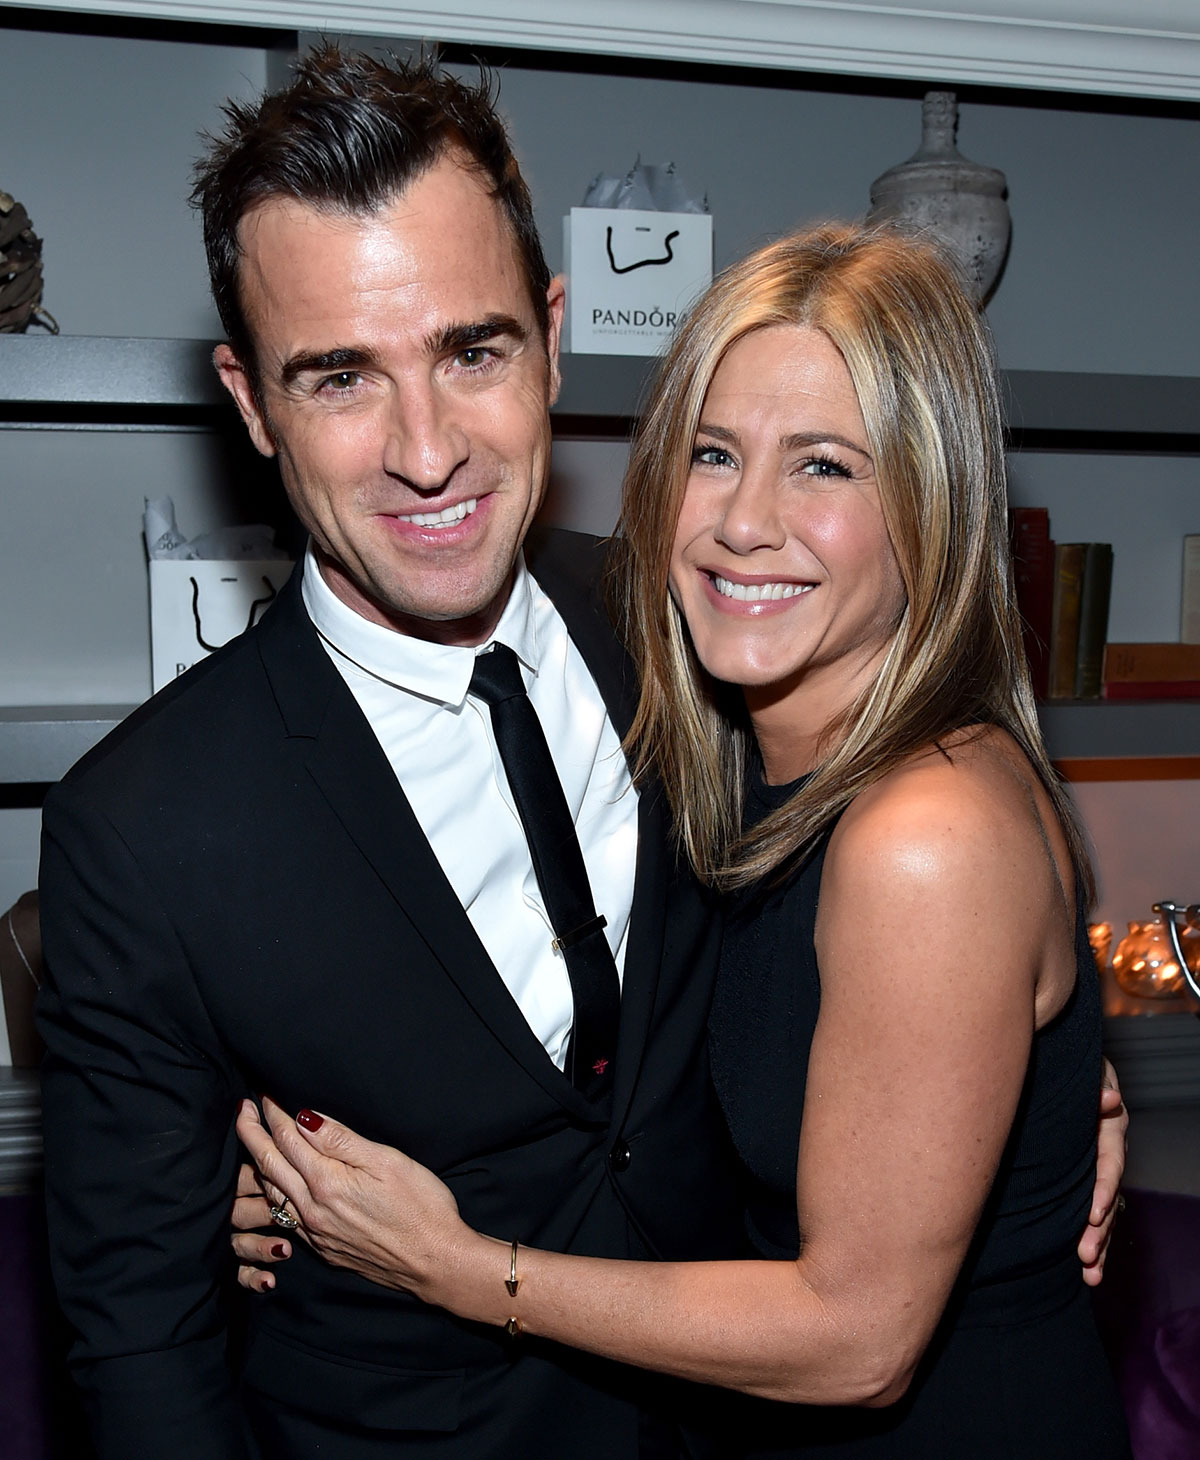 Jennifer-Aniston-and-Justin-Theroux -Have-No-Contact-After-Divorce-split.jpg?quality=74&strip=all